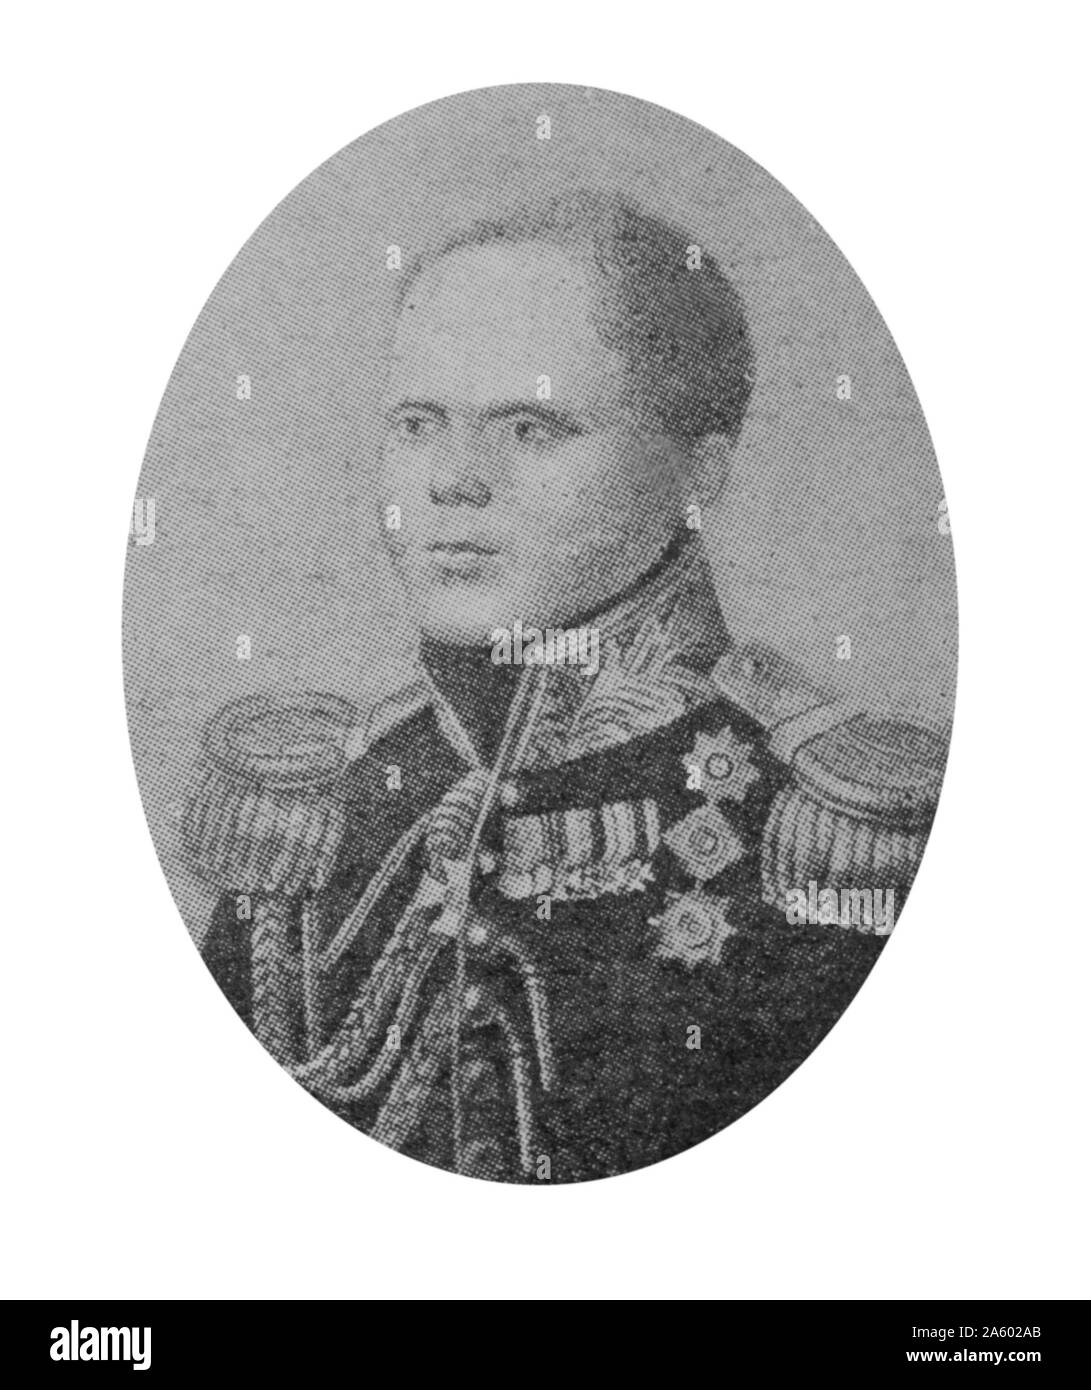 Portrait of Grand Duke Konstantin Pavlovich of Russia (1779-1831) Grand duke of Russia and the second son of Emperor Paul I and Sophie Dorothea of Württemberg. Dated 19th Century Stock Photo